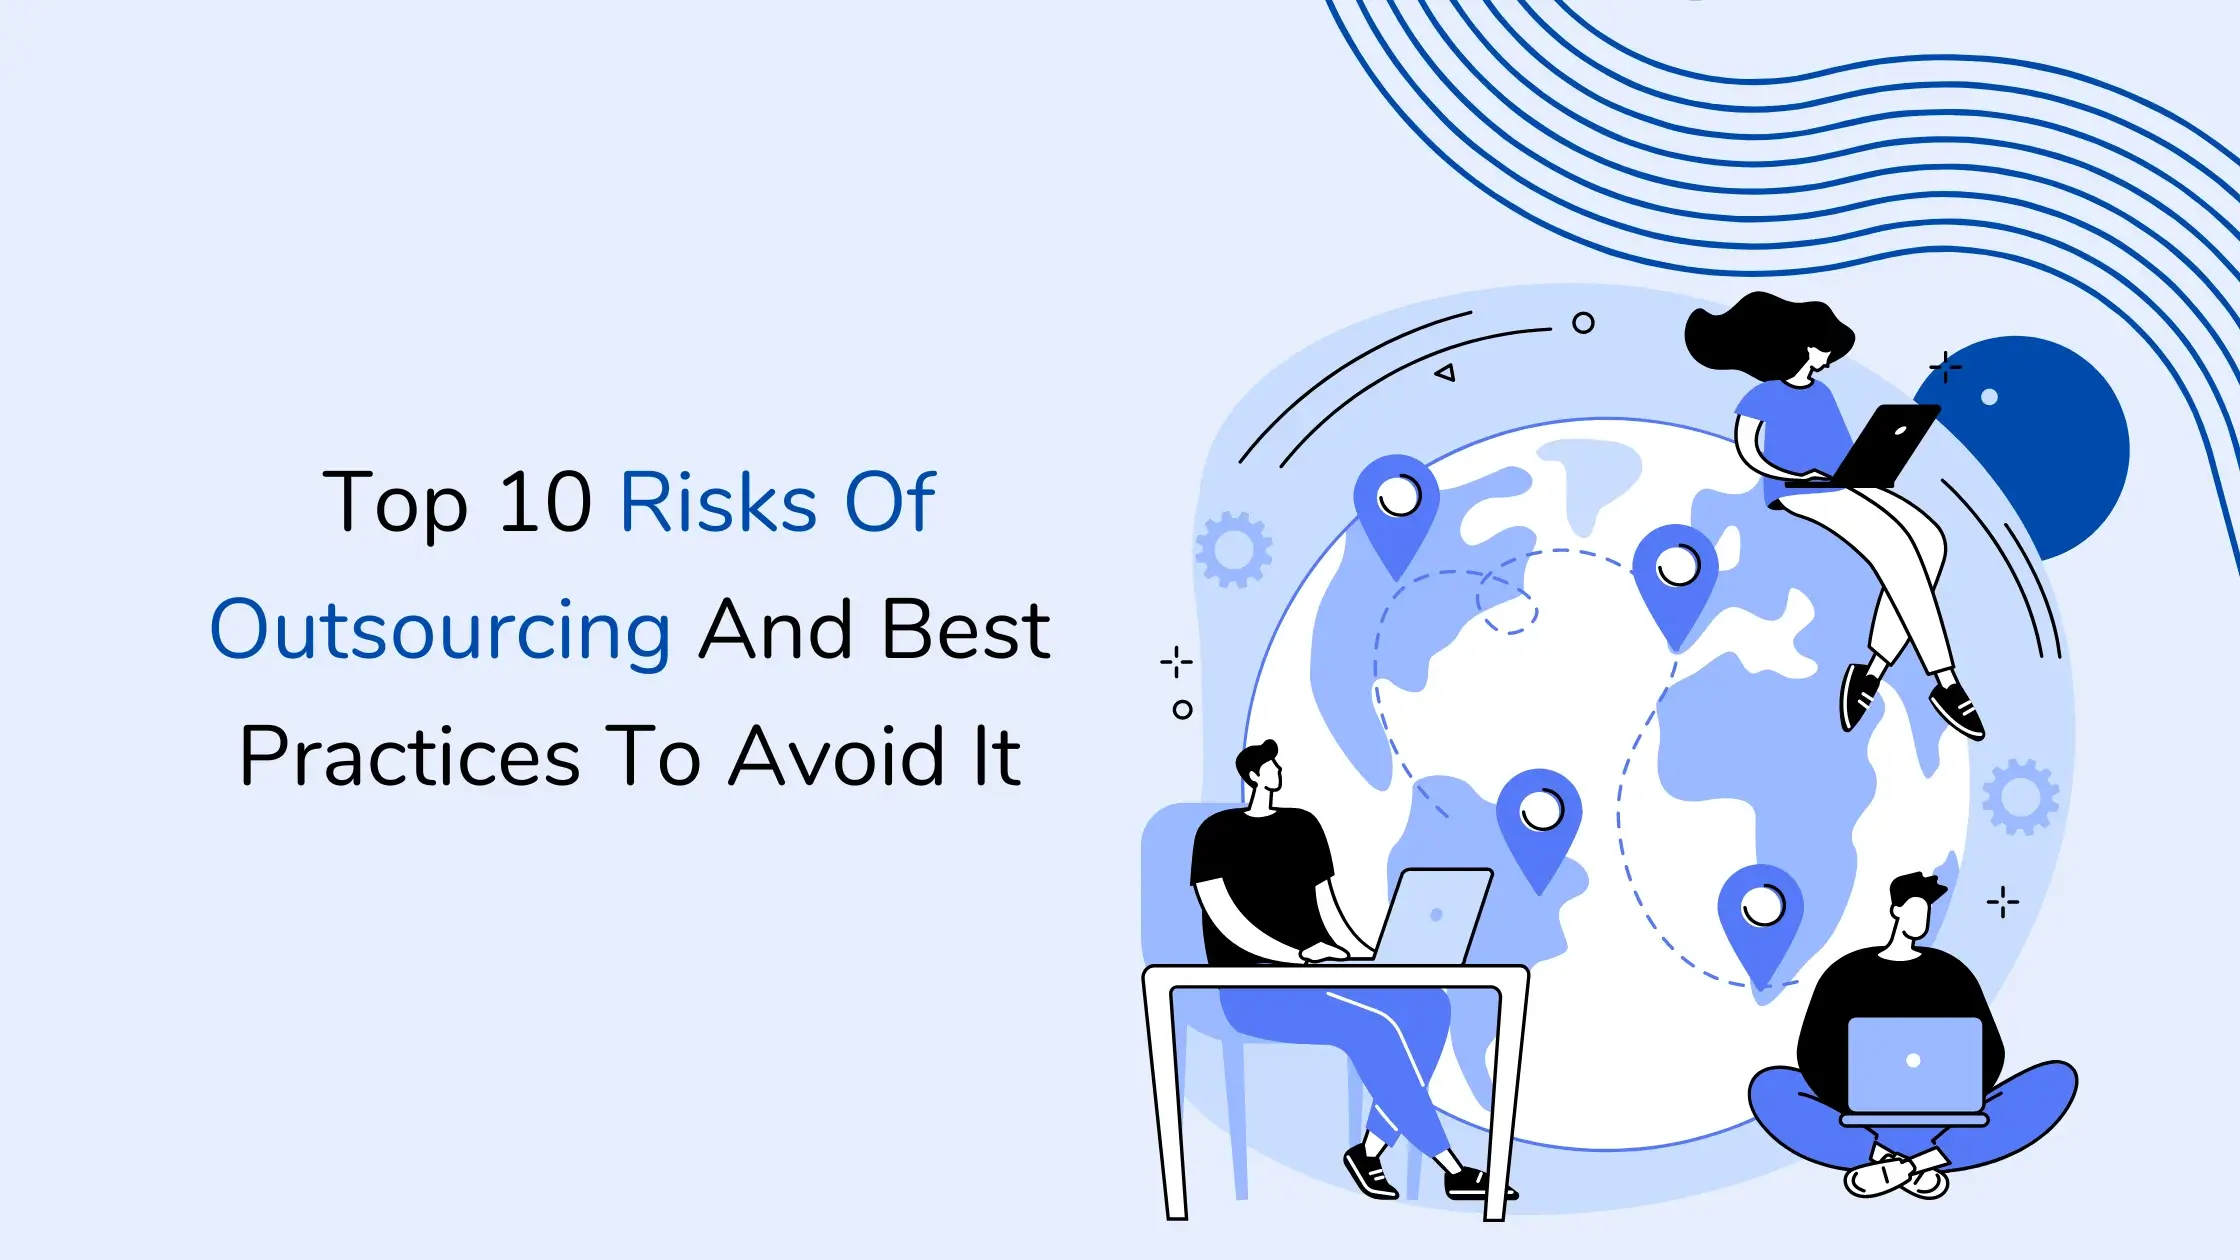 Top-10-Risks-Of-Outsourcing-And-Best-Practices-To-Avoid-It